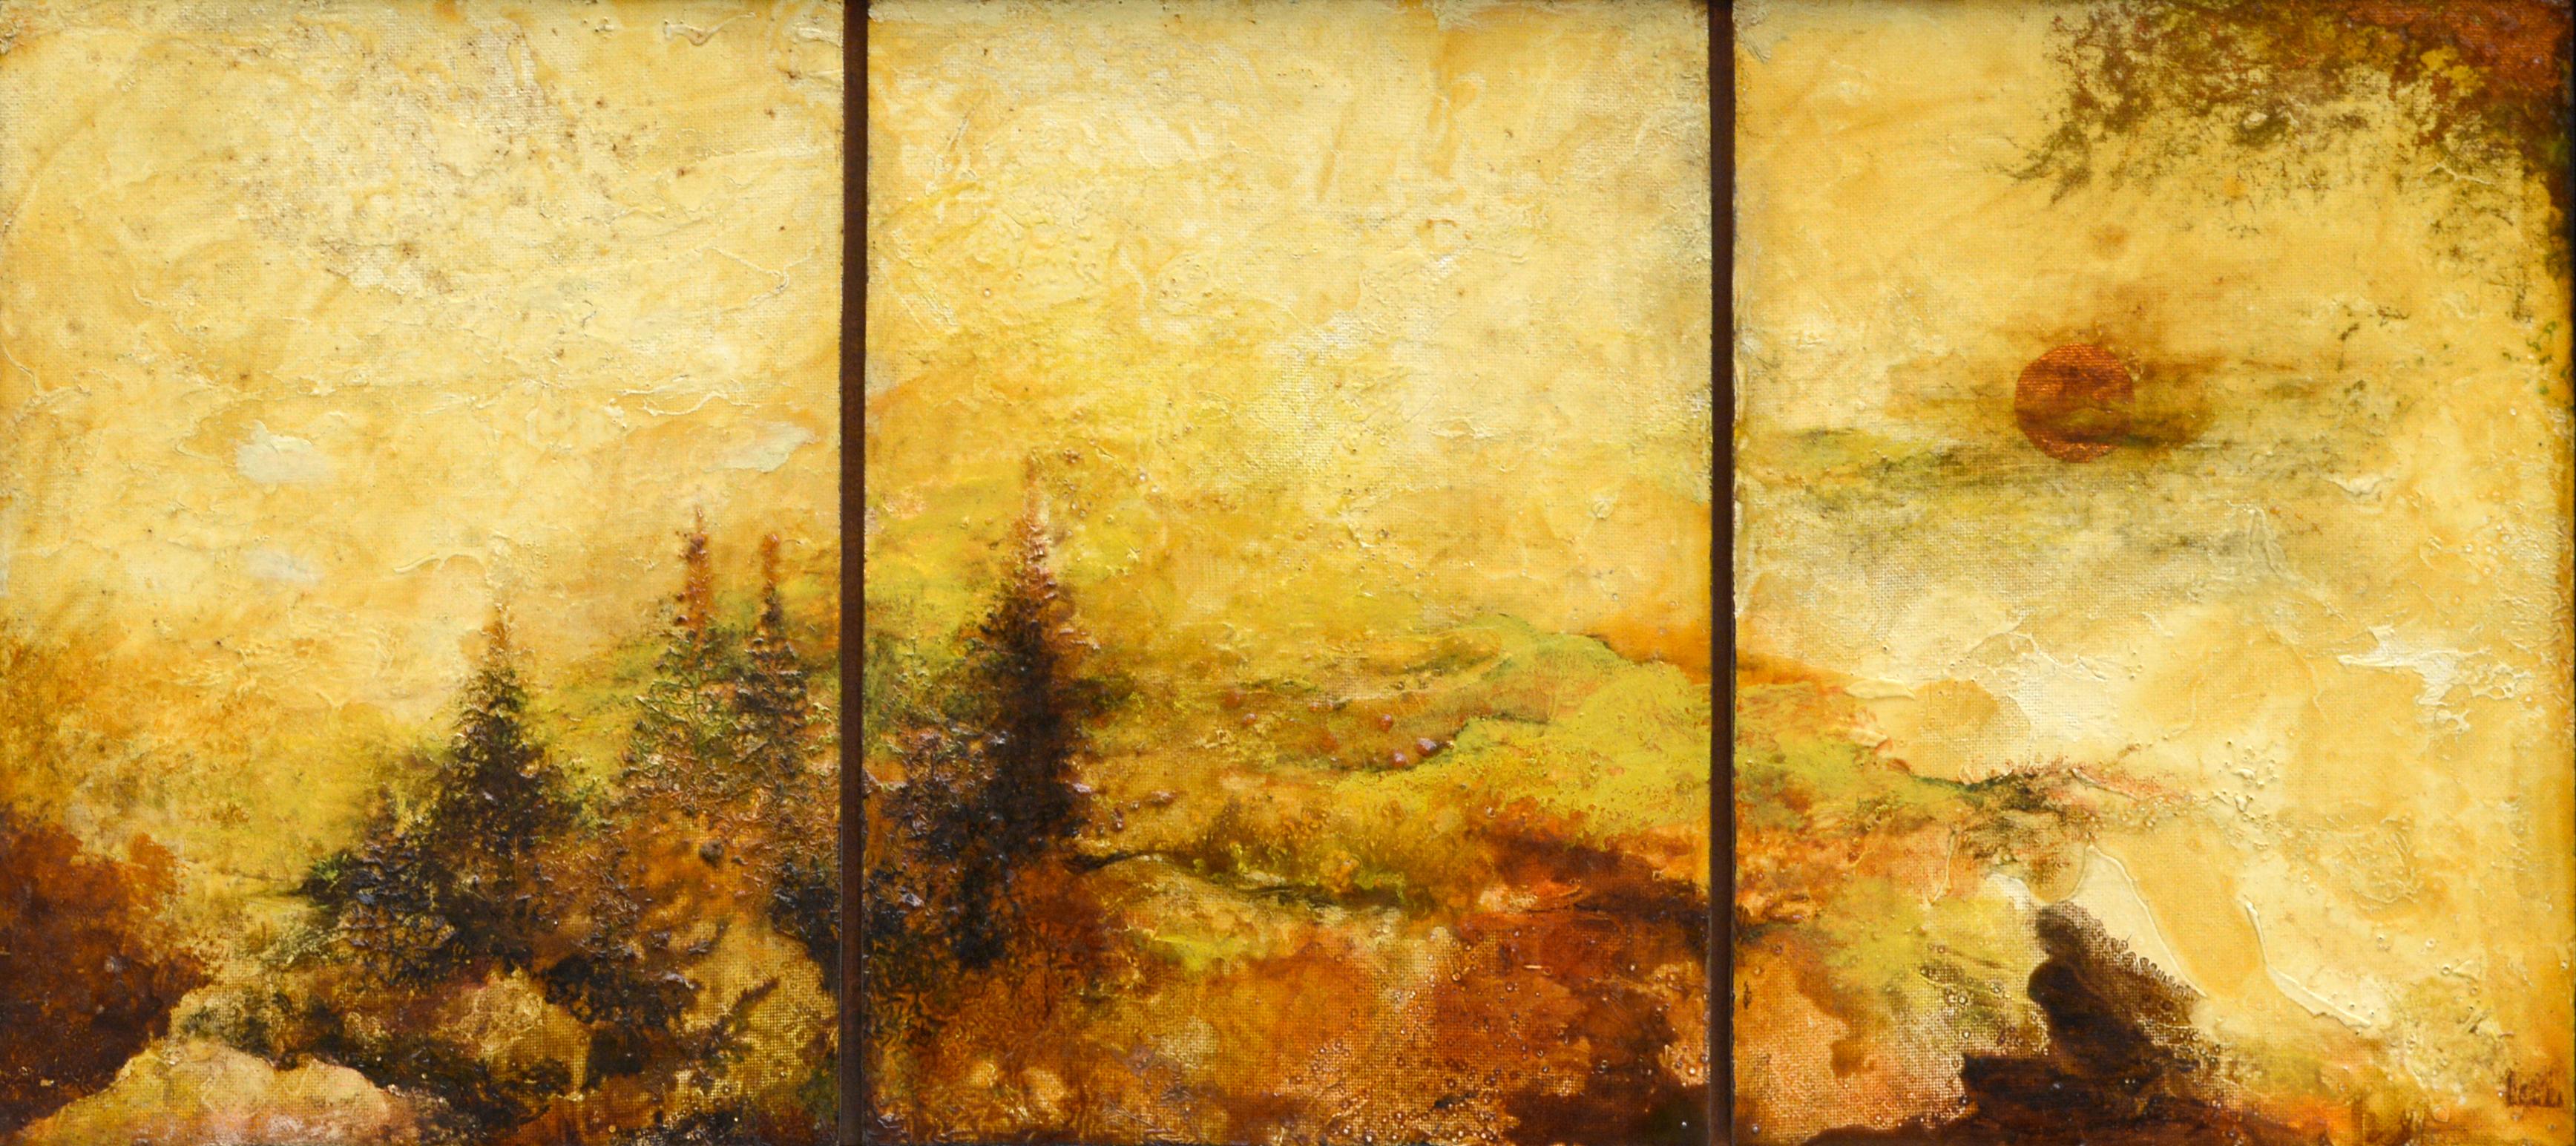 Moody Sunrise Triptych Landscape - Painting by Unknown